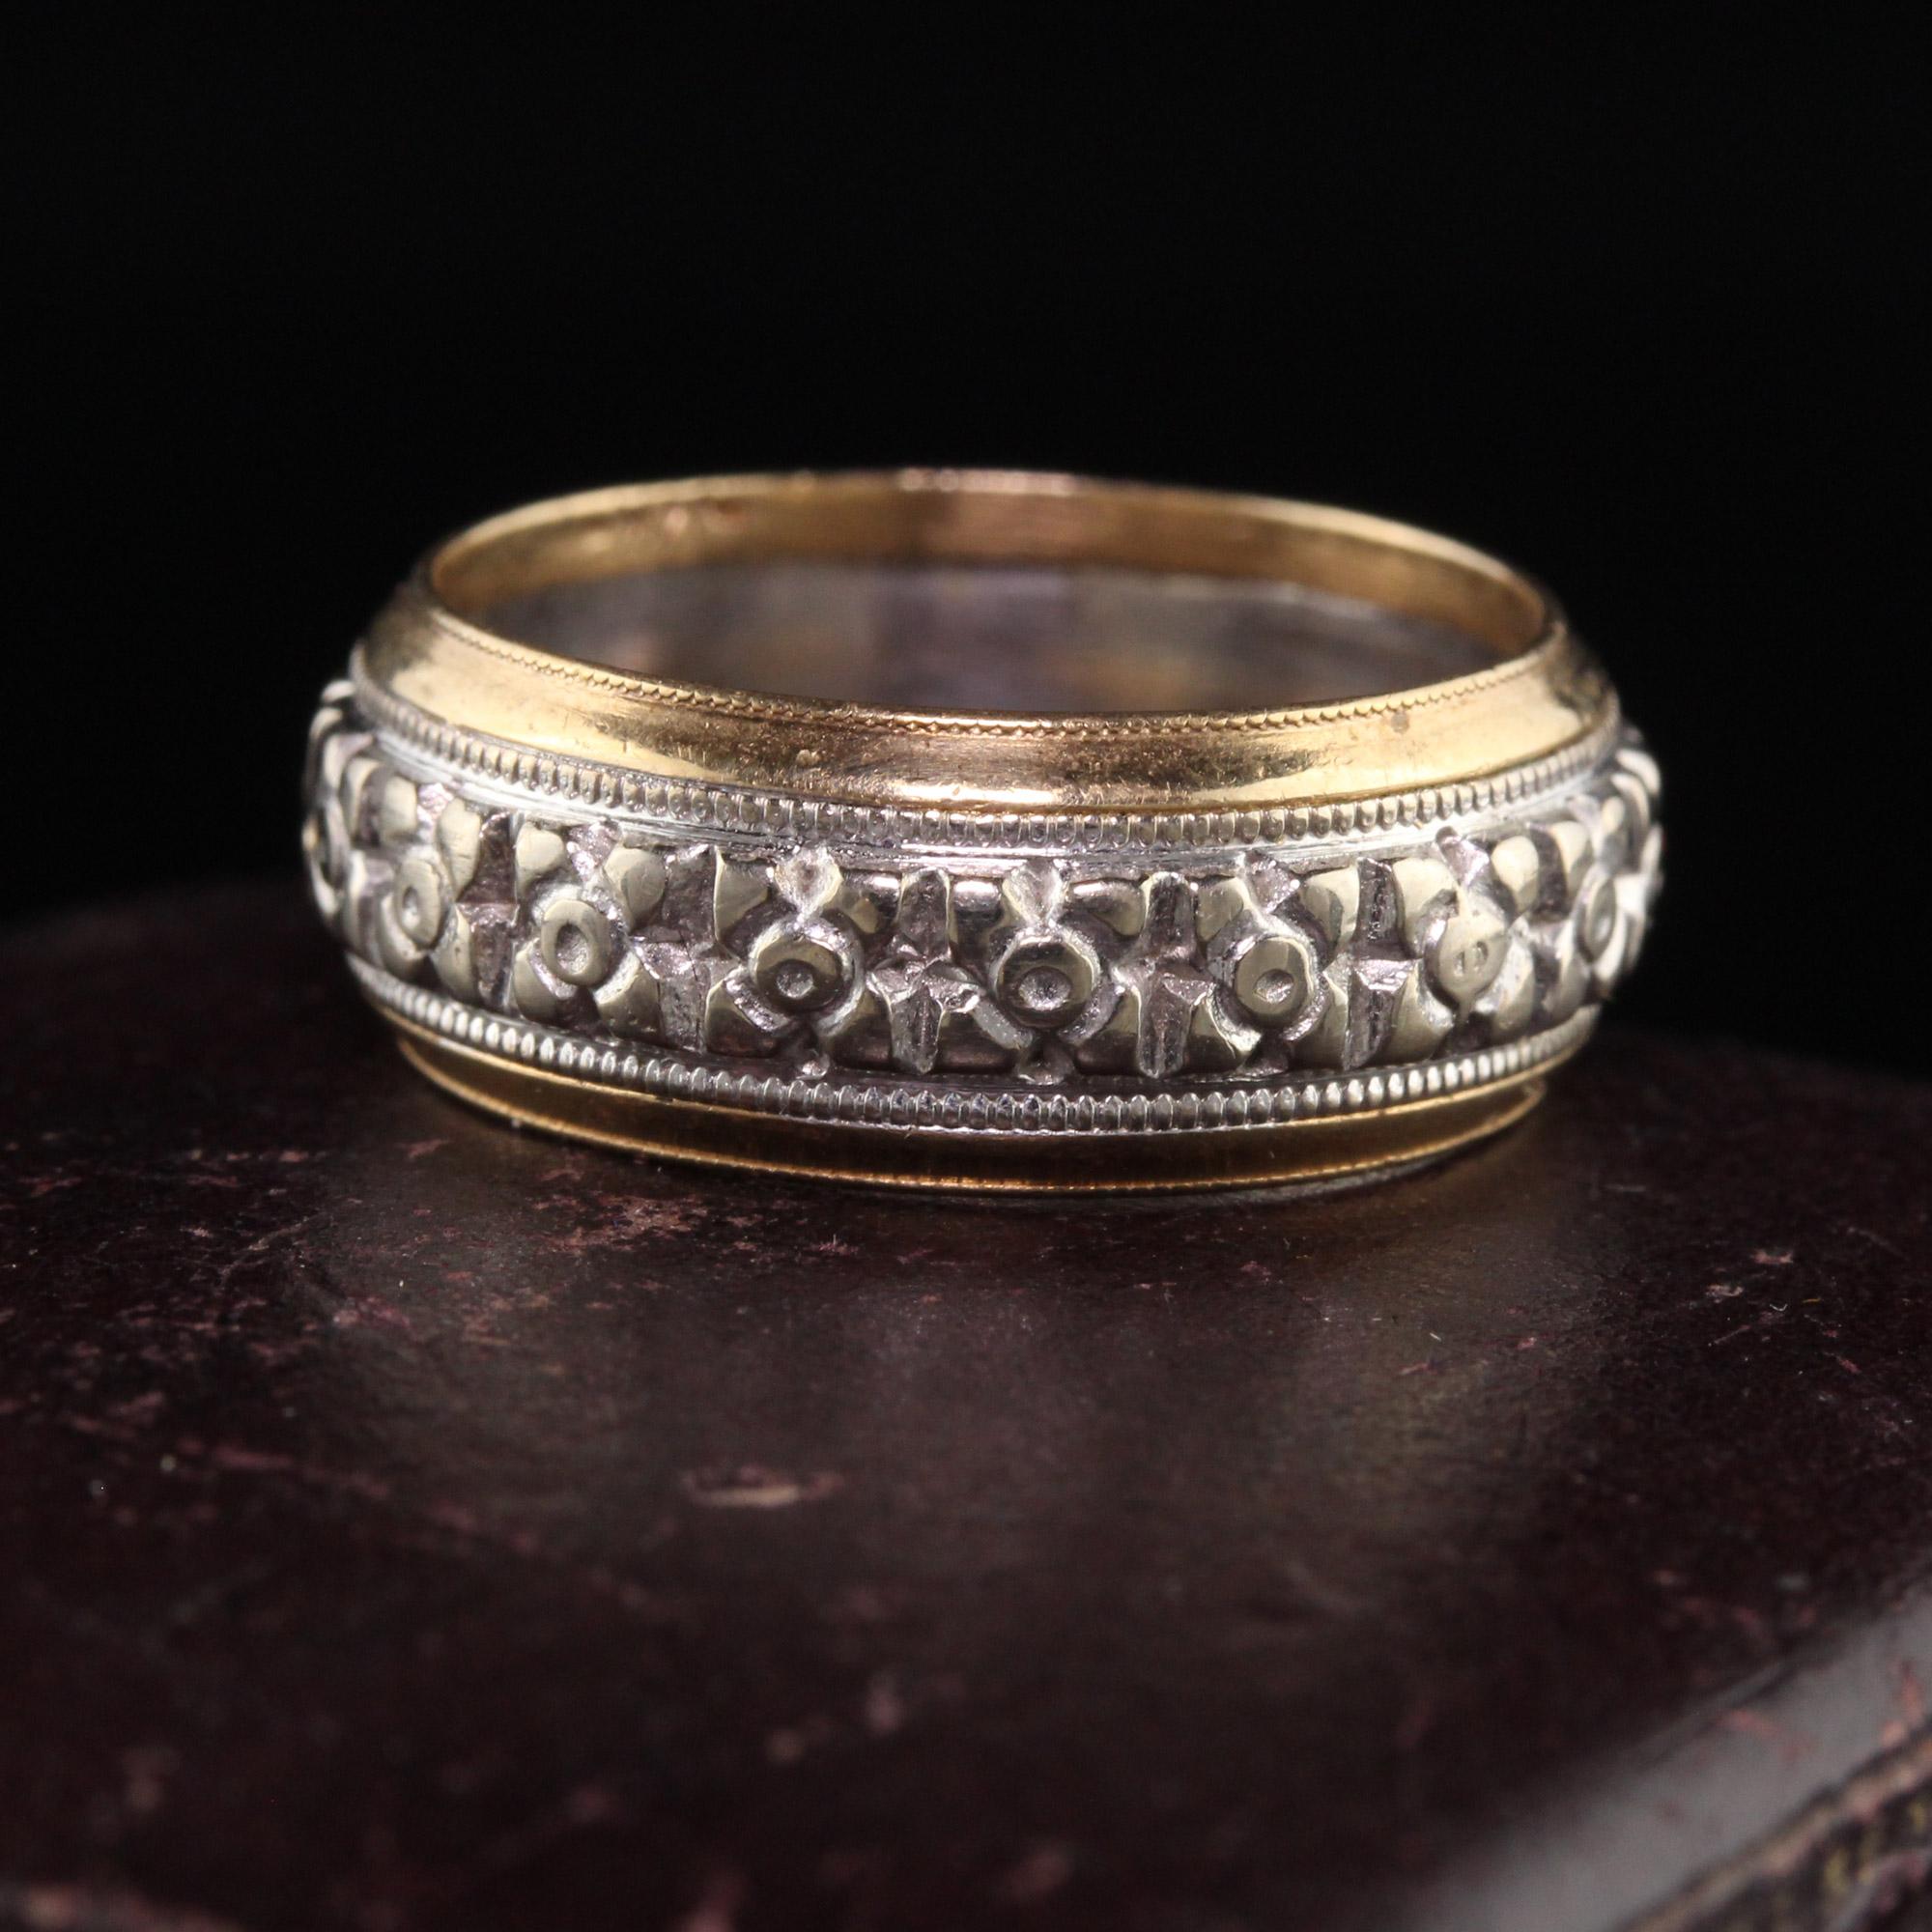 Beautiful Antique Art Deco 14K Yellow and White Gold Engraved Blossom Wedding Band. This gorgeous wedding band has the classic blossom engravings going around the entire ring in white gold and the outer edges are in14k yellow gold. It is in great